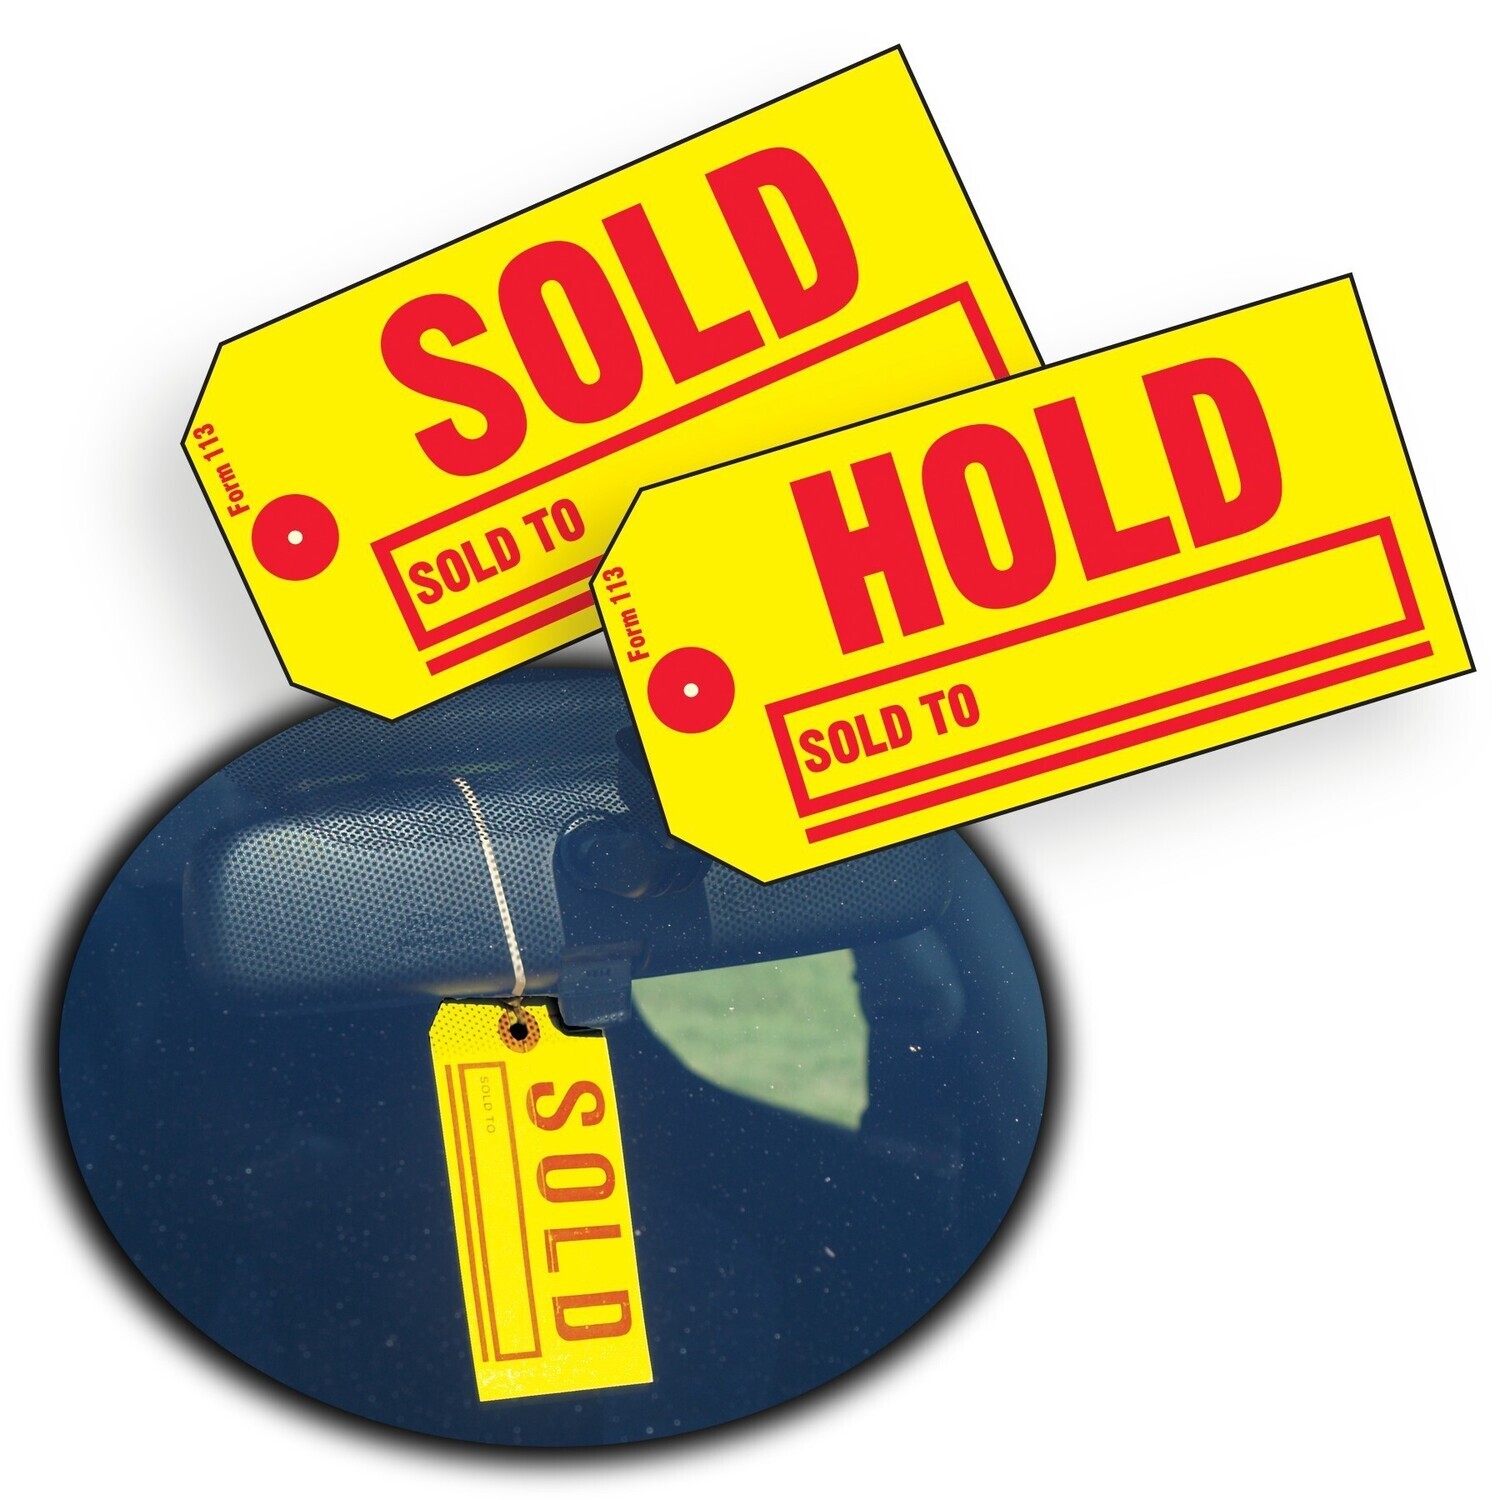 Large "Sold-Hold" Vehicle Tag